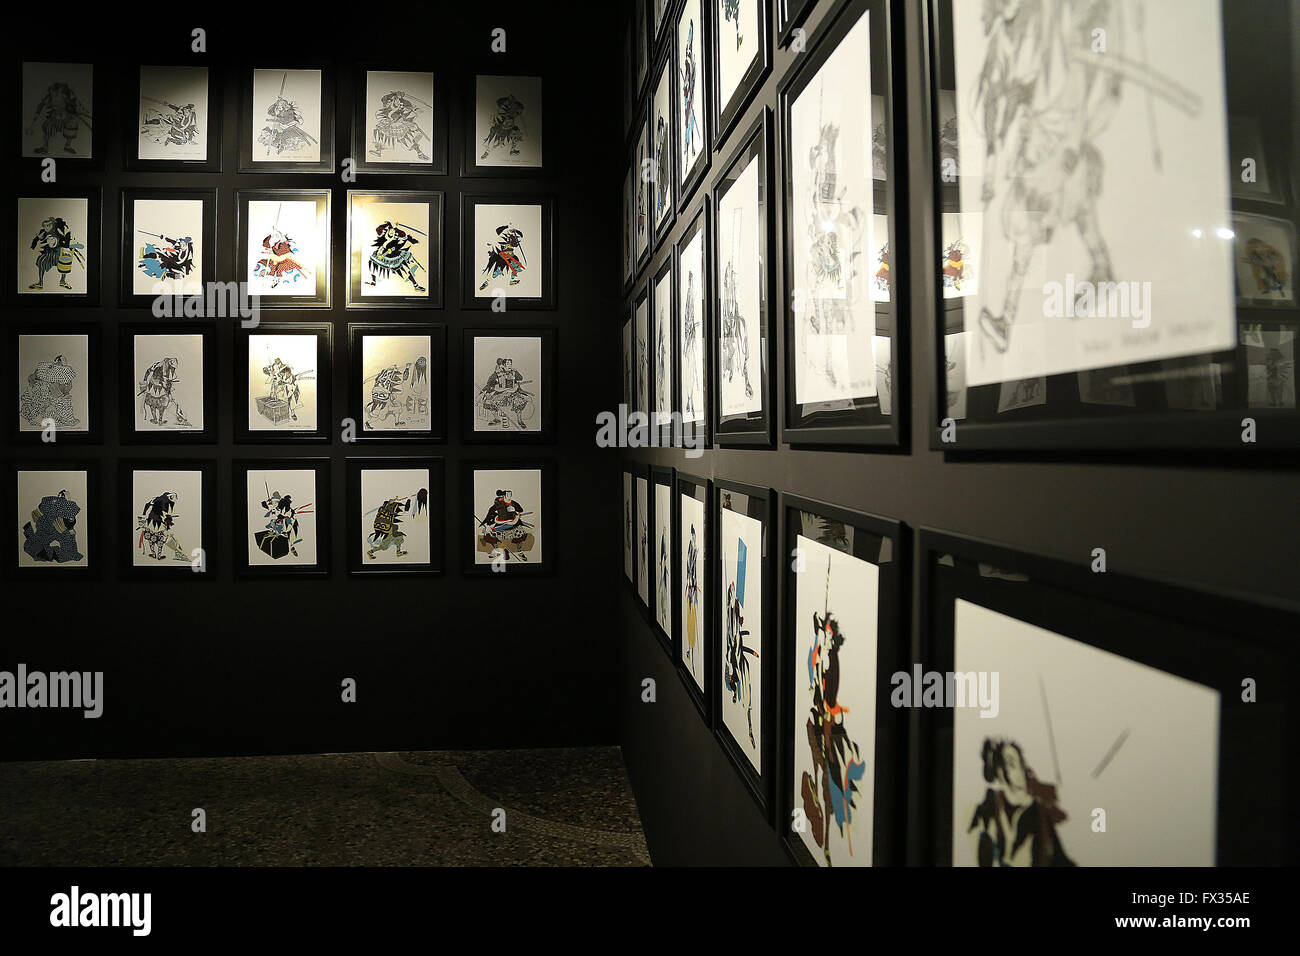 At the Museum of Oriental art in Turin (MAO) are exposed 50 original drawings in pencil and color digitally made by the artist Emanuele Tenderini, constituting the manga that reinterprets visually one of the most famous historical events of Japan, narrated in Japanese best known play of all time, the Kanadehon Chushingura. The story tells the true events between 1701 and 1703, when 47 ronin wants to avenge their master was forced to commit seppuku. The exhibition highlights all the players who took part in the affair, the 47 ronin along with other fundamental characters of the play of Bunraku Stock Photo